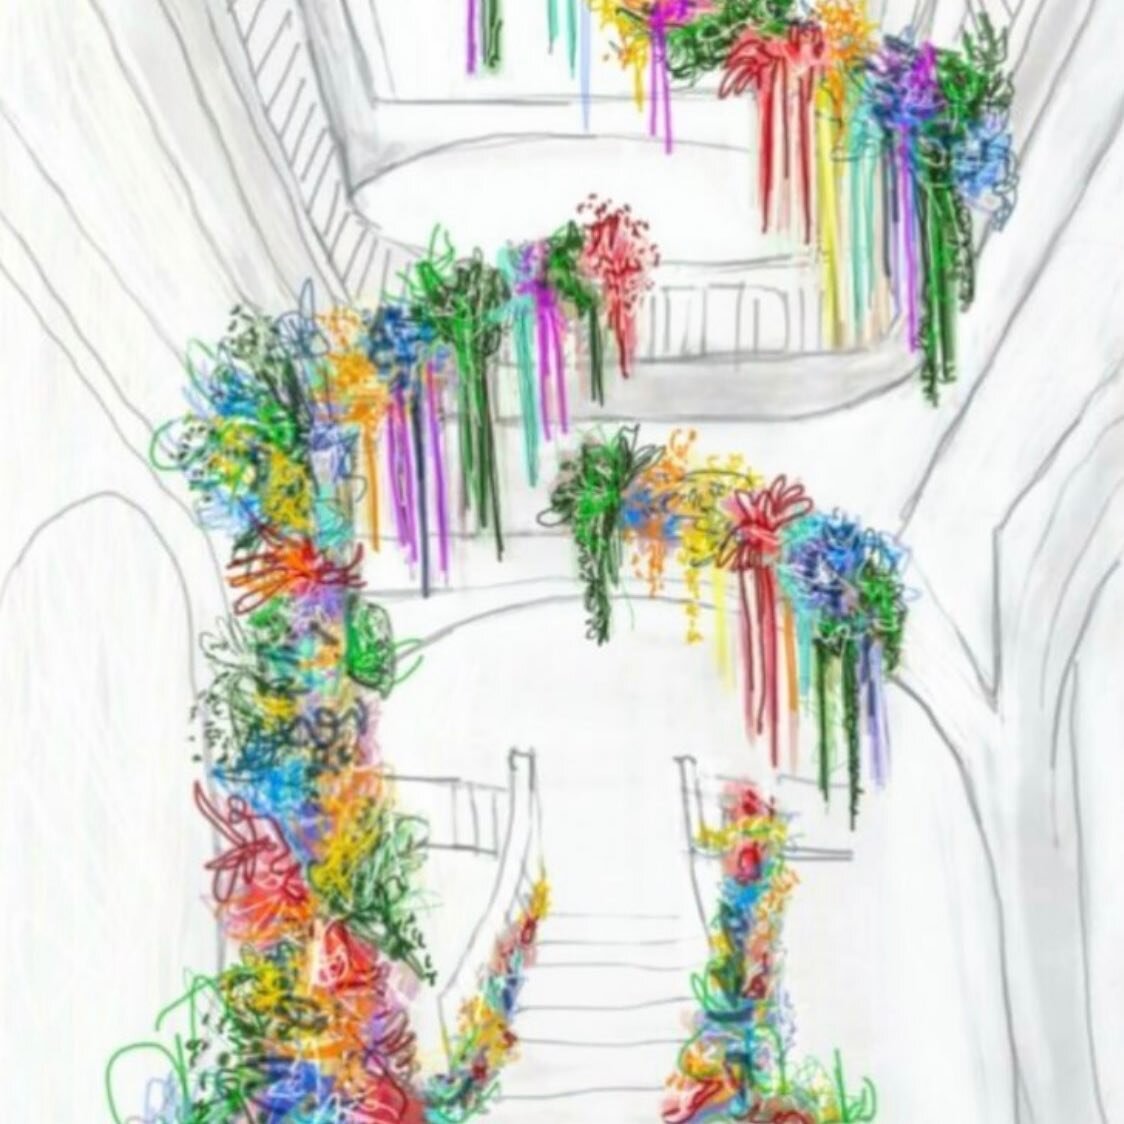 We are three weeks from being live for Art Alive.  I&rsquo;m honored to be assisting Floral Artist, Beth O&rsquo;Reilly with her rotunda floral art installation &ldquo;Botanical Graffiti&rdquo; to celebrate the San Diego museum of art event, Art Aliv